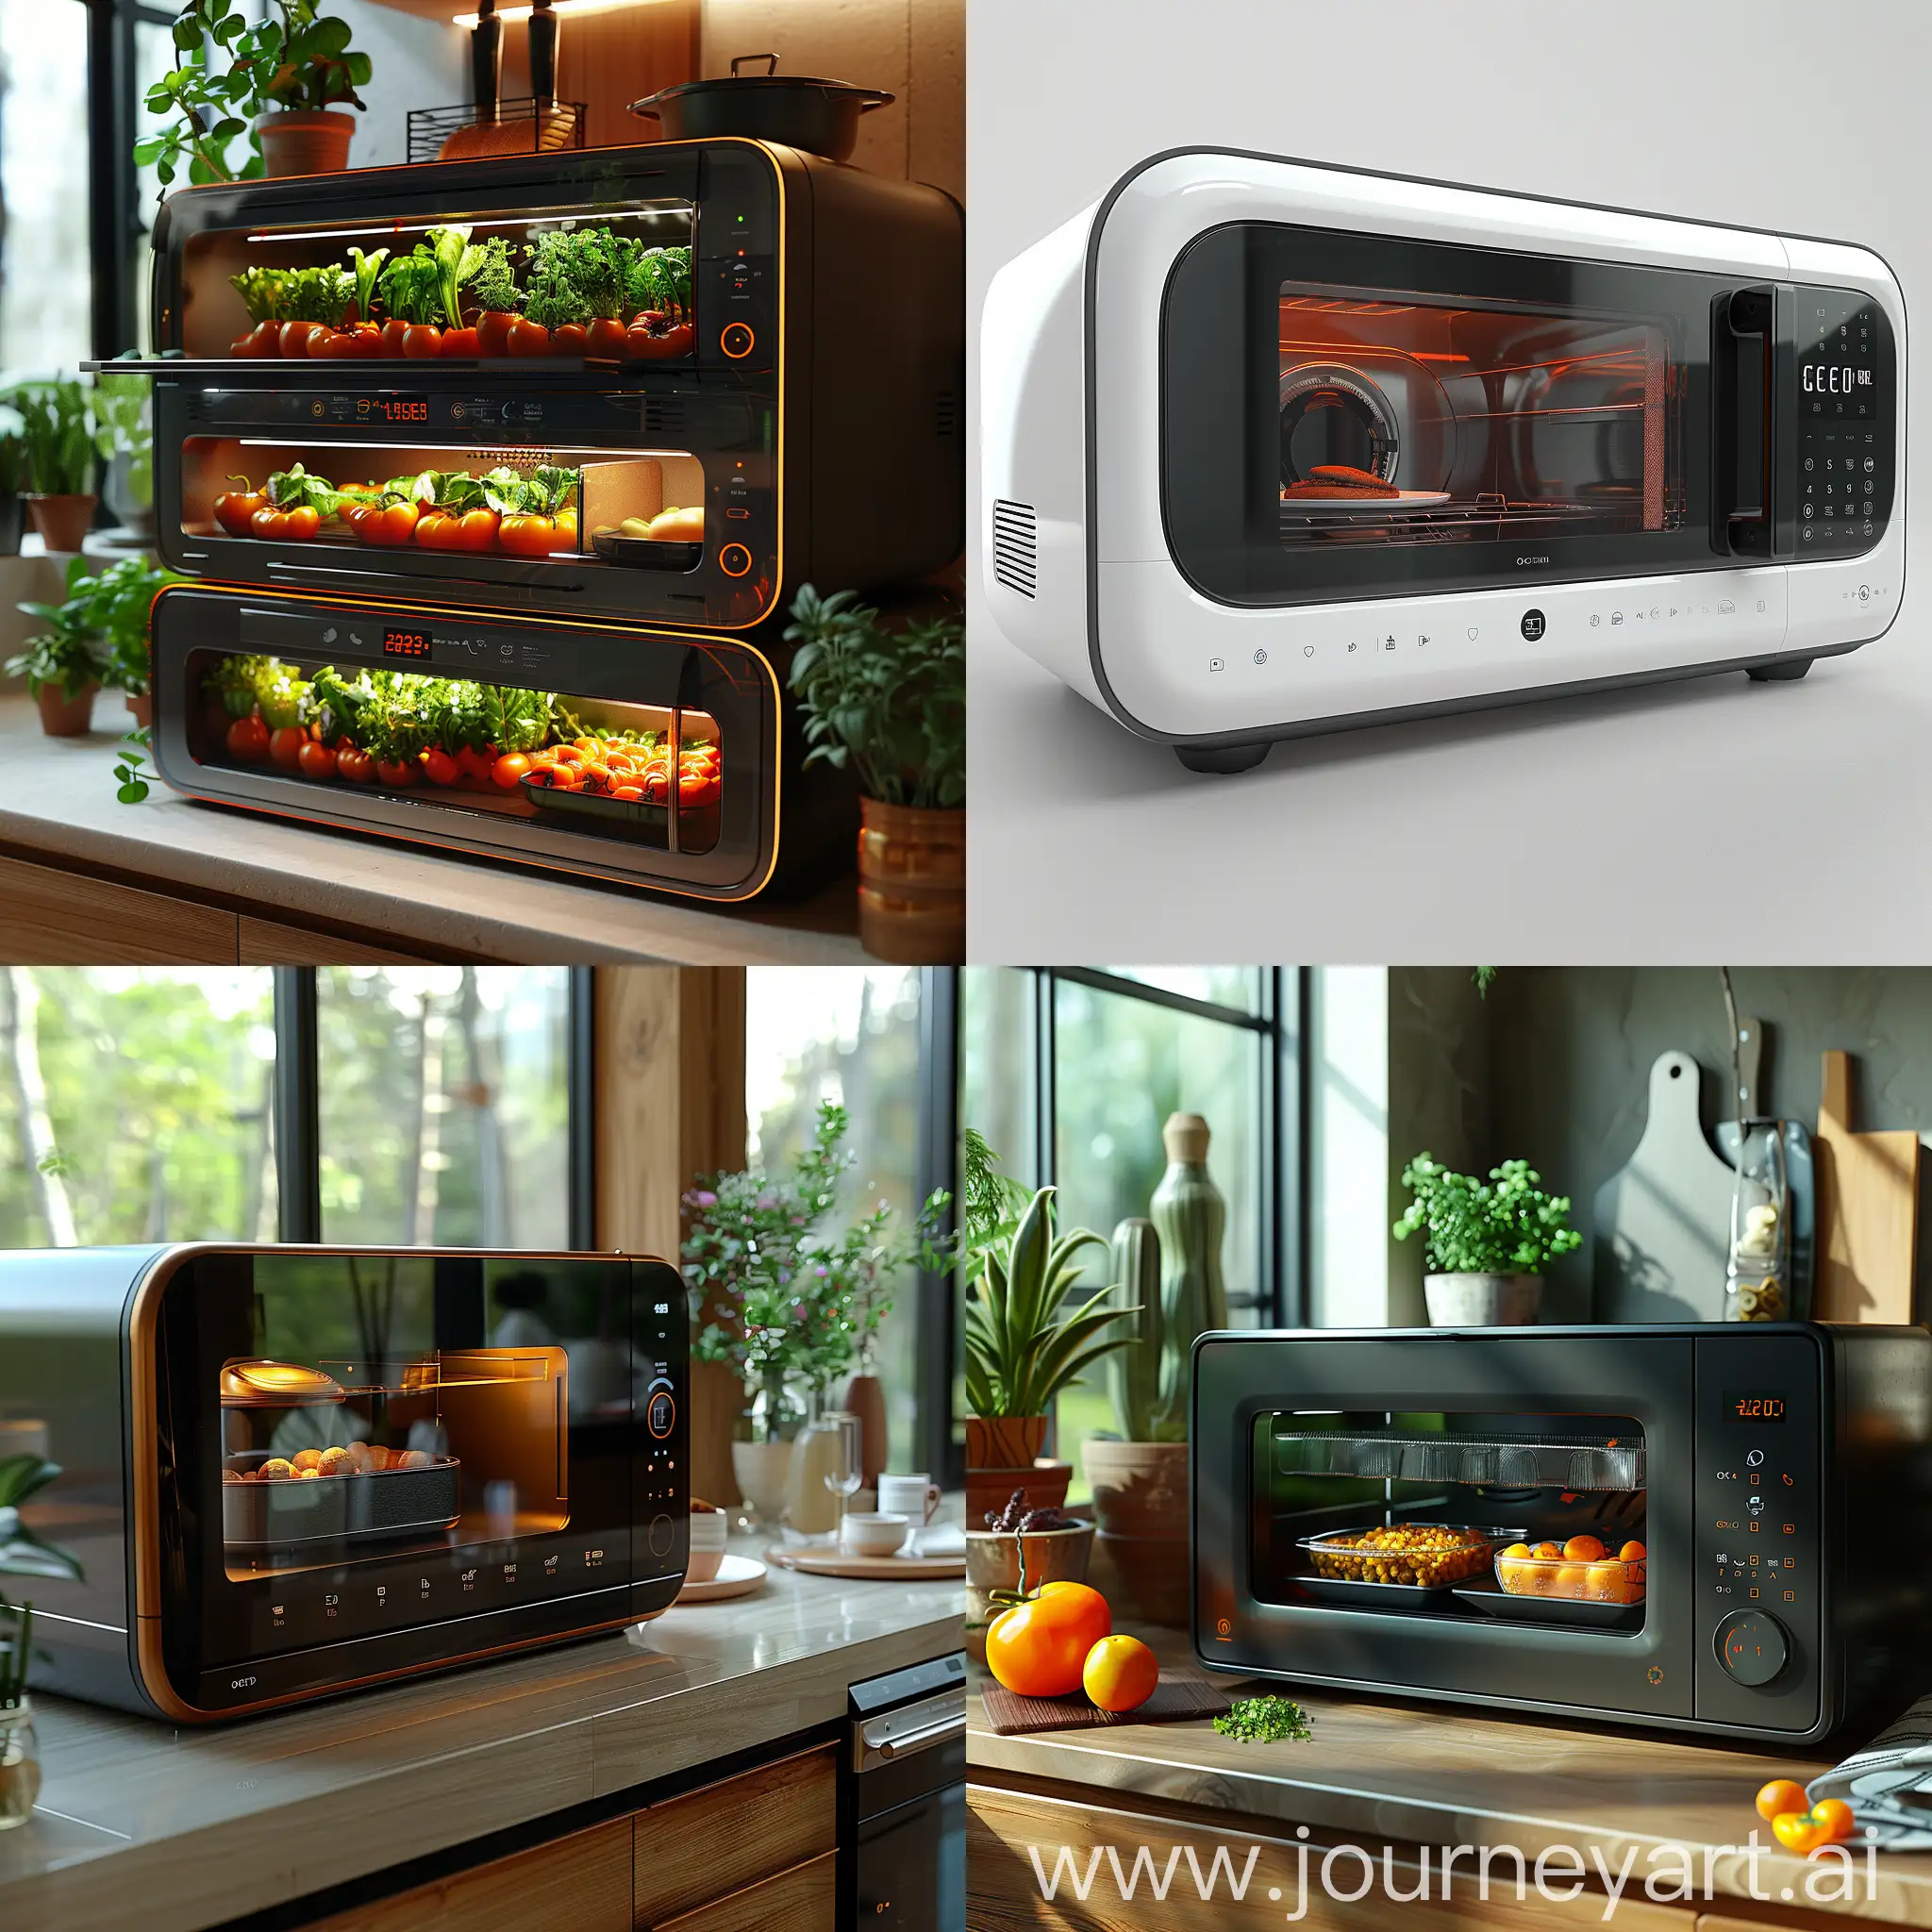 Futuristic microwave, futuristic features, Smart Reheating & Cooking, Voice Control, Virtual Chef Assistant, Self-Cleaning Interior, Built-in Food Scale, Smartphone App Connectivity, Nutrient Preservation Technology, Eco-Friendly Mode, Automated Meal Prep & Portion Control, Built-in Projector & Screen, octane render --stylize 1000